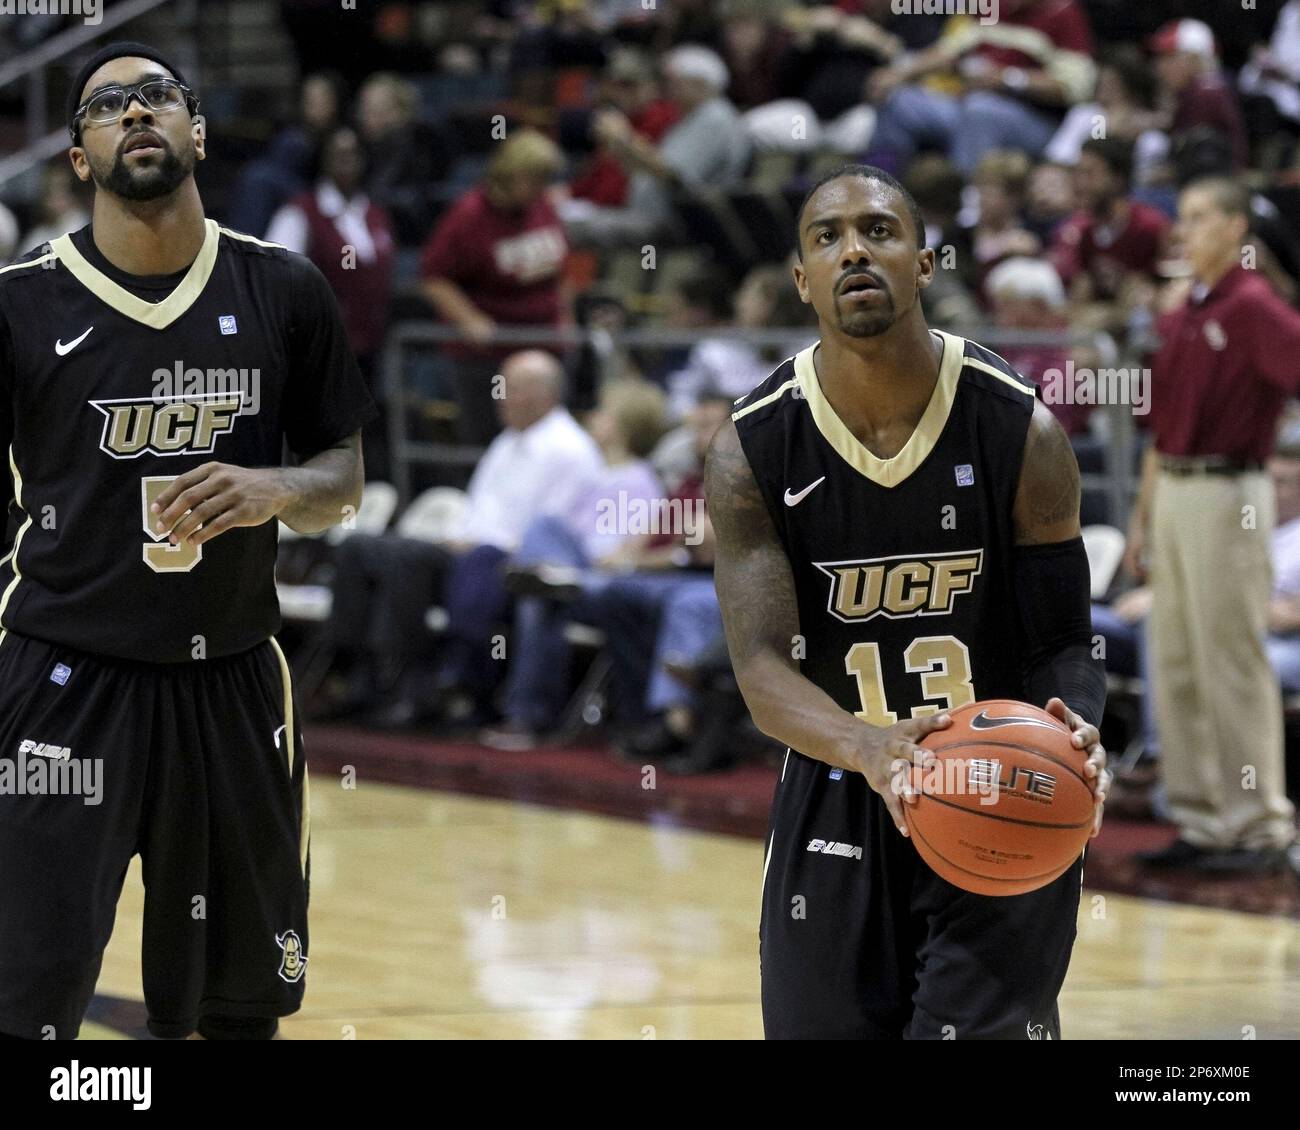 Central Florida Guards Marcus Jordan (5) and Jeffrey Jordan (13) during the  game against Florida State at the Tucker Center on November 14, 2011 in  Tallahassee, Florida. The Jordans are the sons